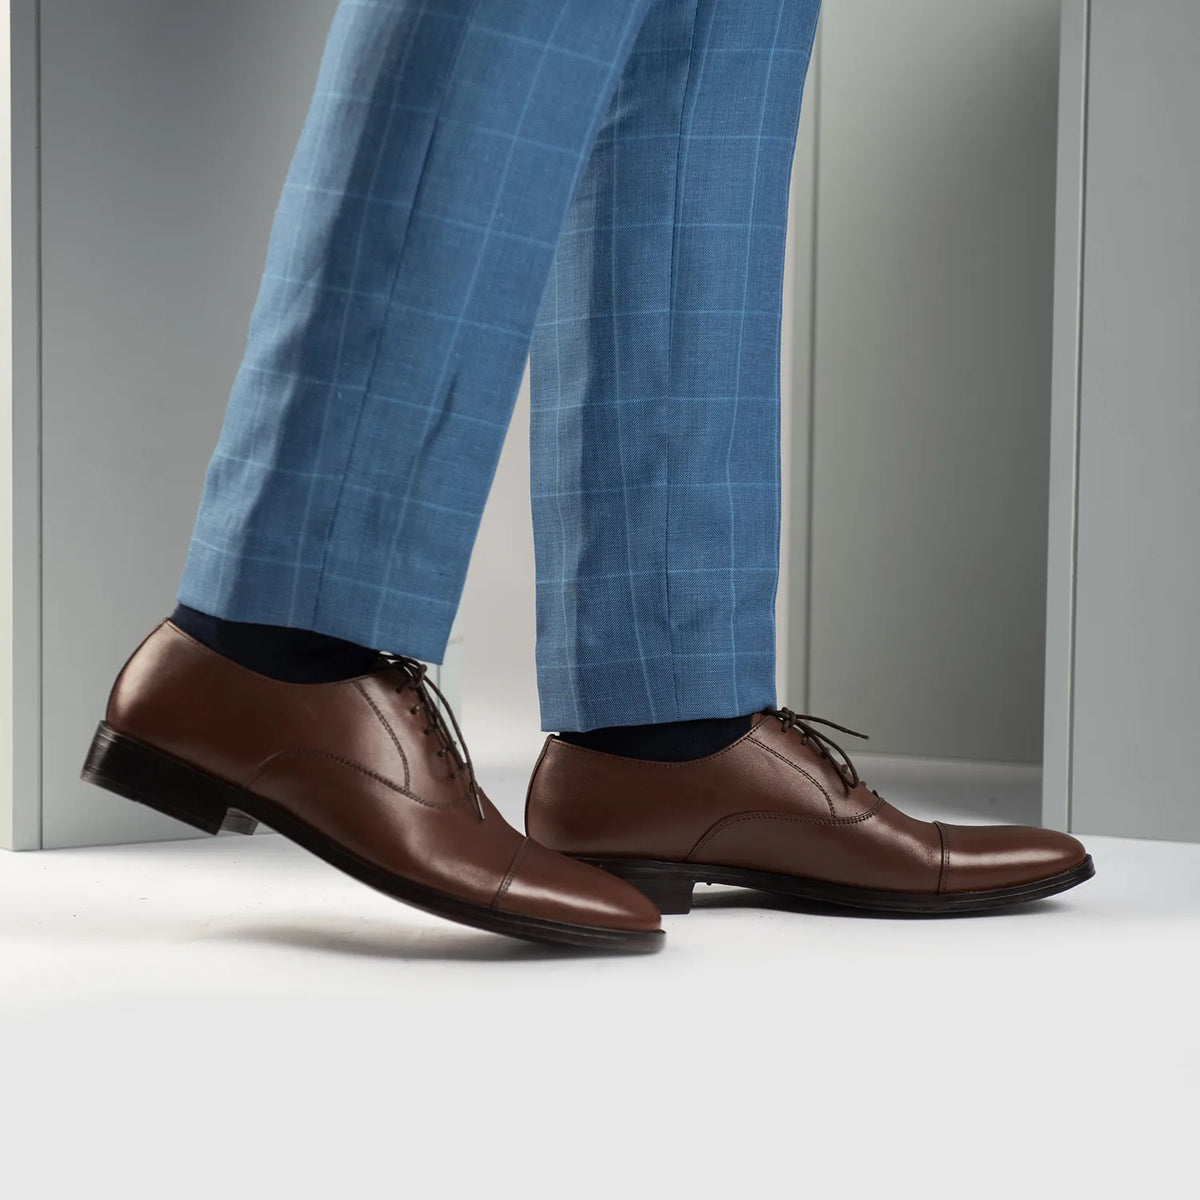 Professor Oxford Brown Leather Shoes